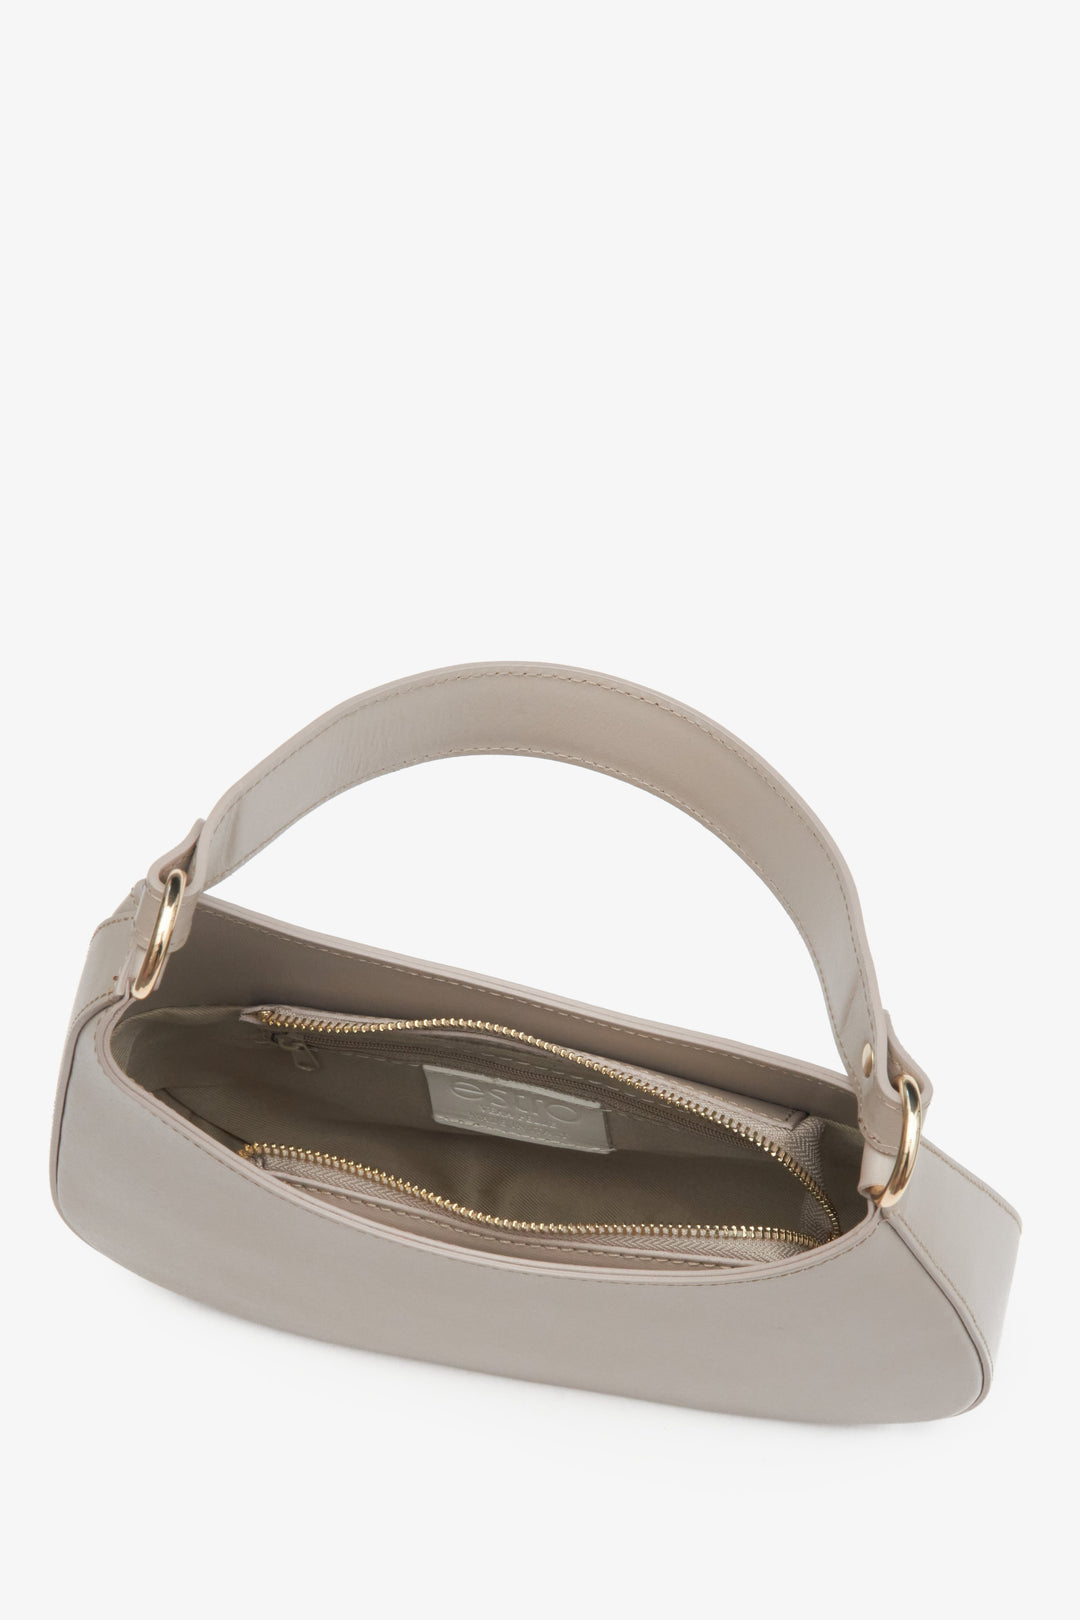 Women's shoulder bag in beige and grey in Italian natural leather - close-up of the interior of the model.